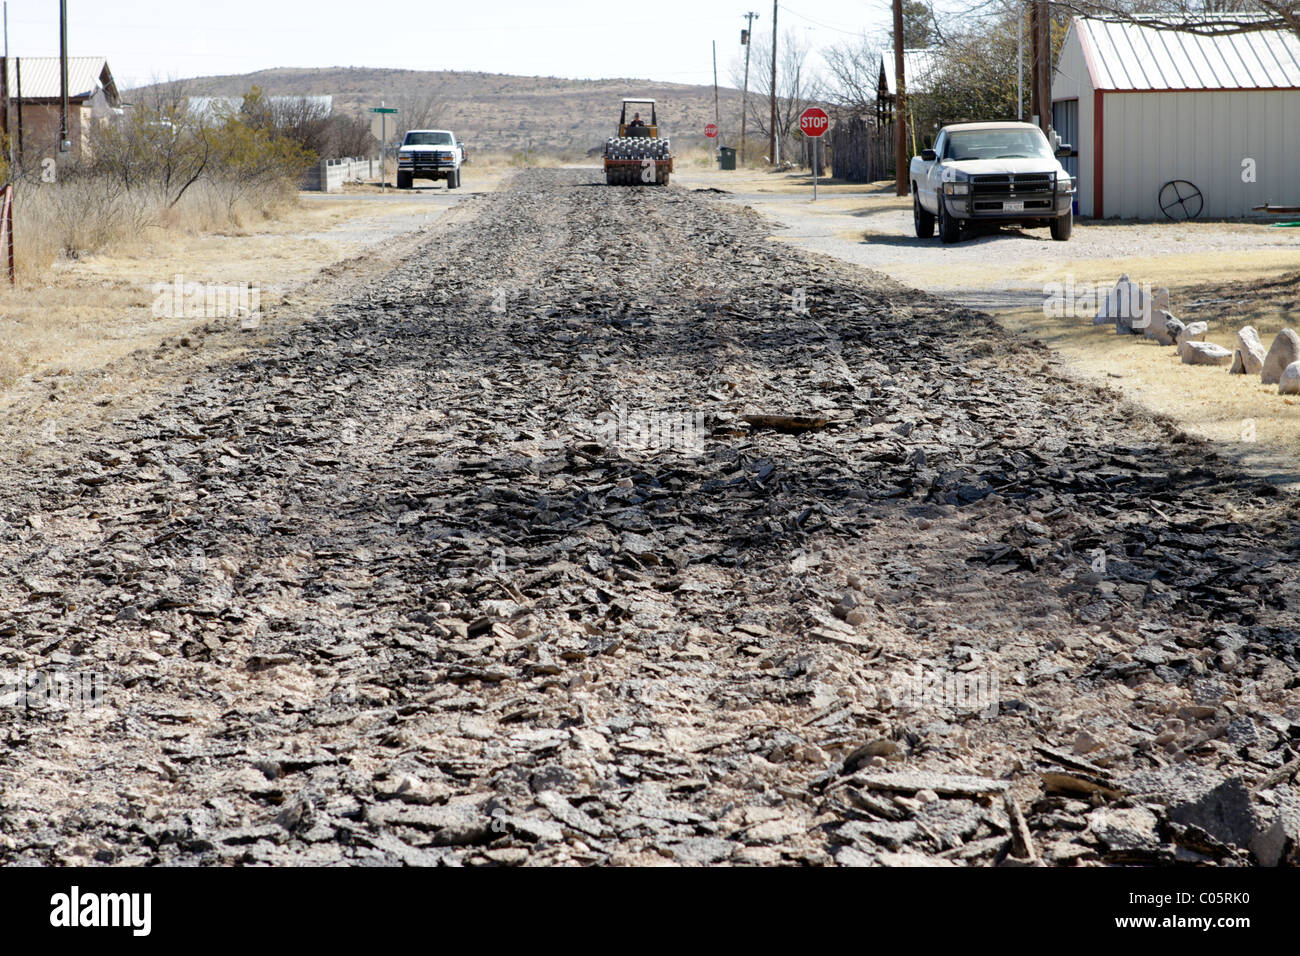 Impact roller breaking a street surfacing before re-pavement in a small West Texas town. Stock Photo